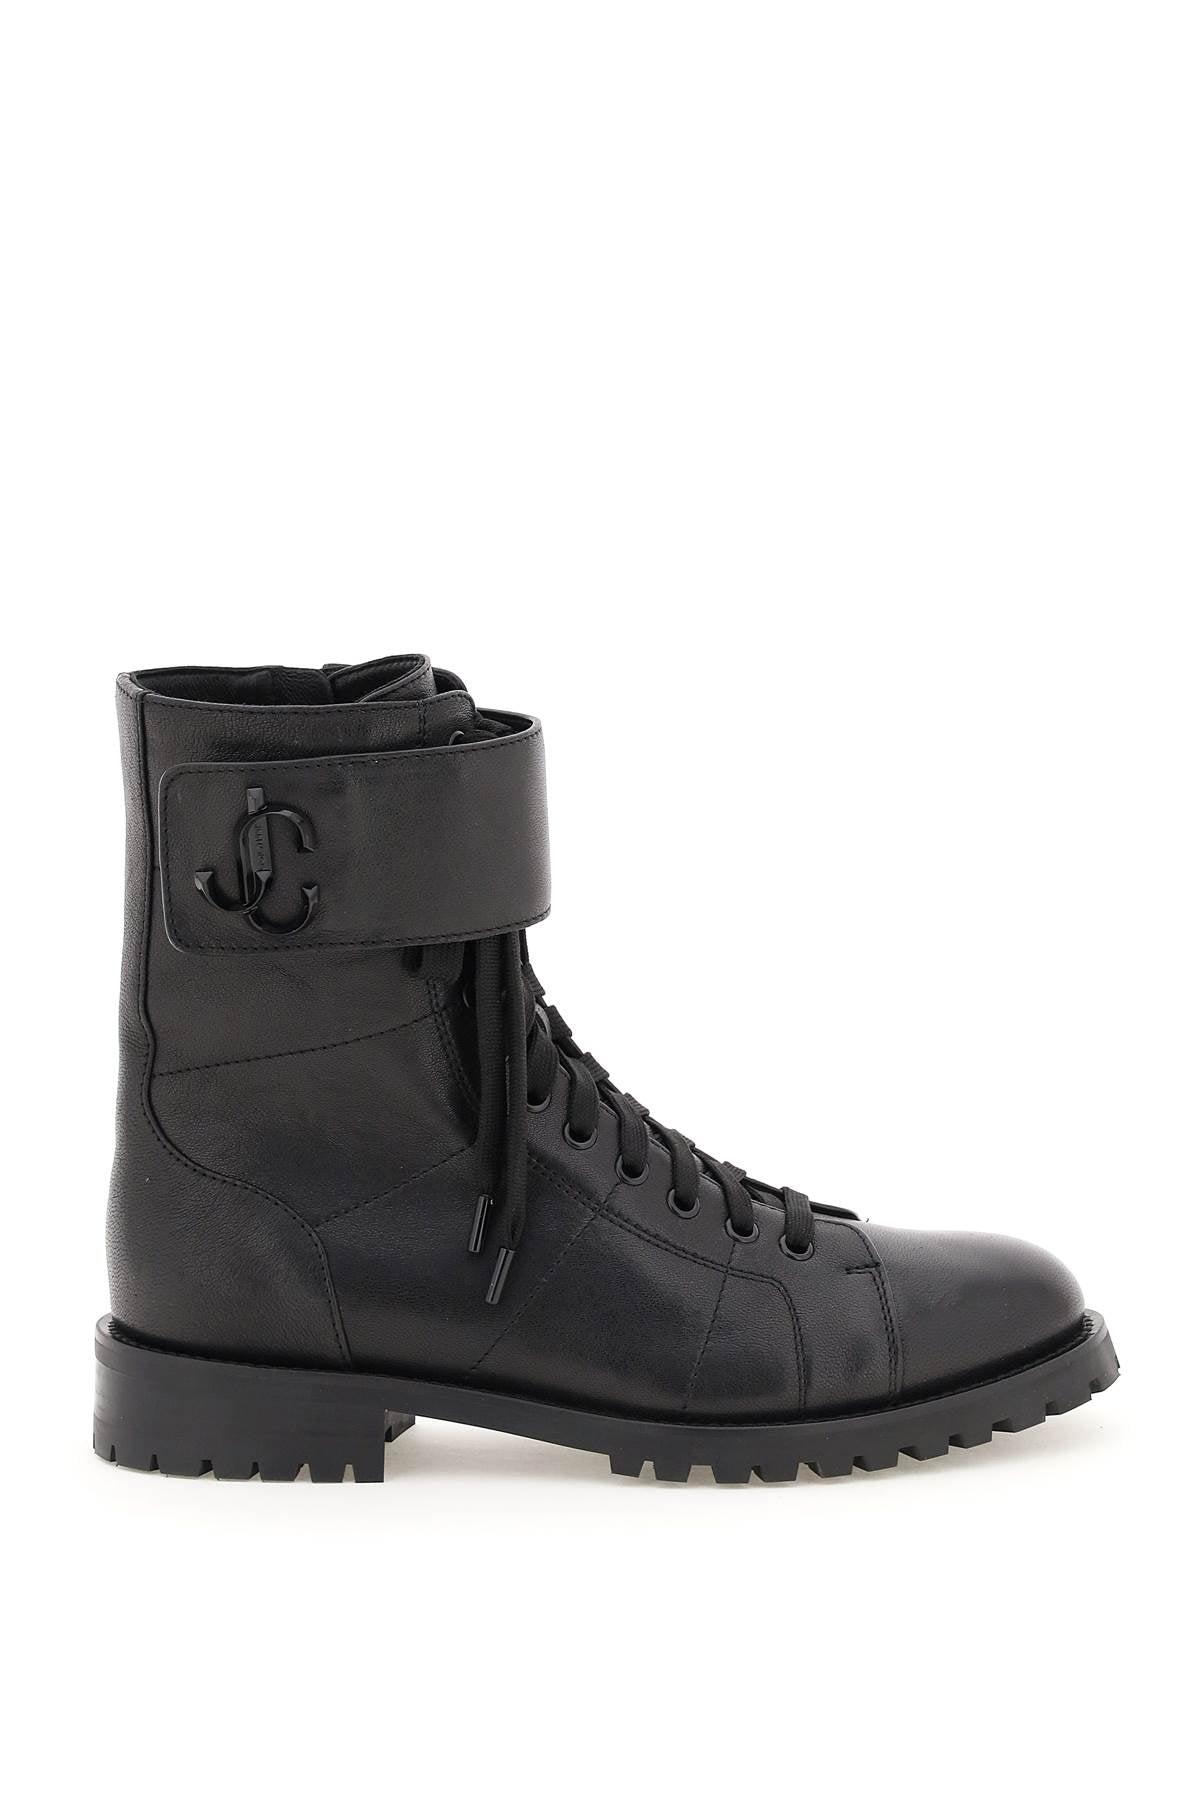 Jimmy Choo Ceirus Lace-up Combat Boots in Black | Lyst